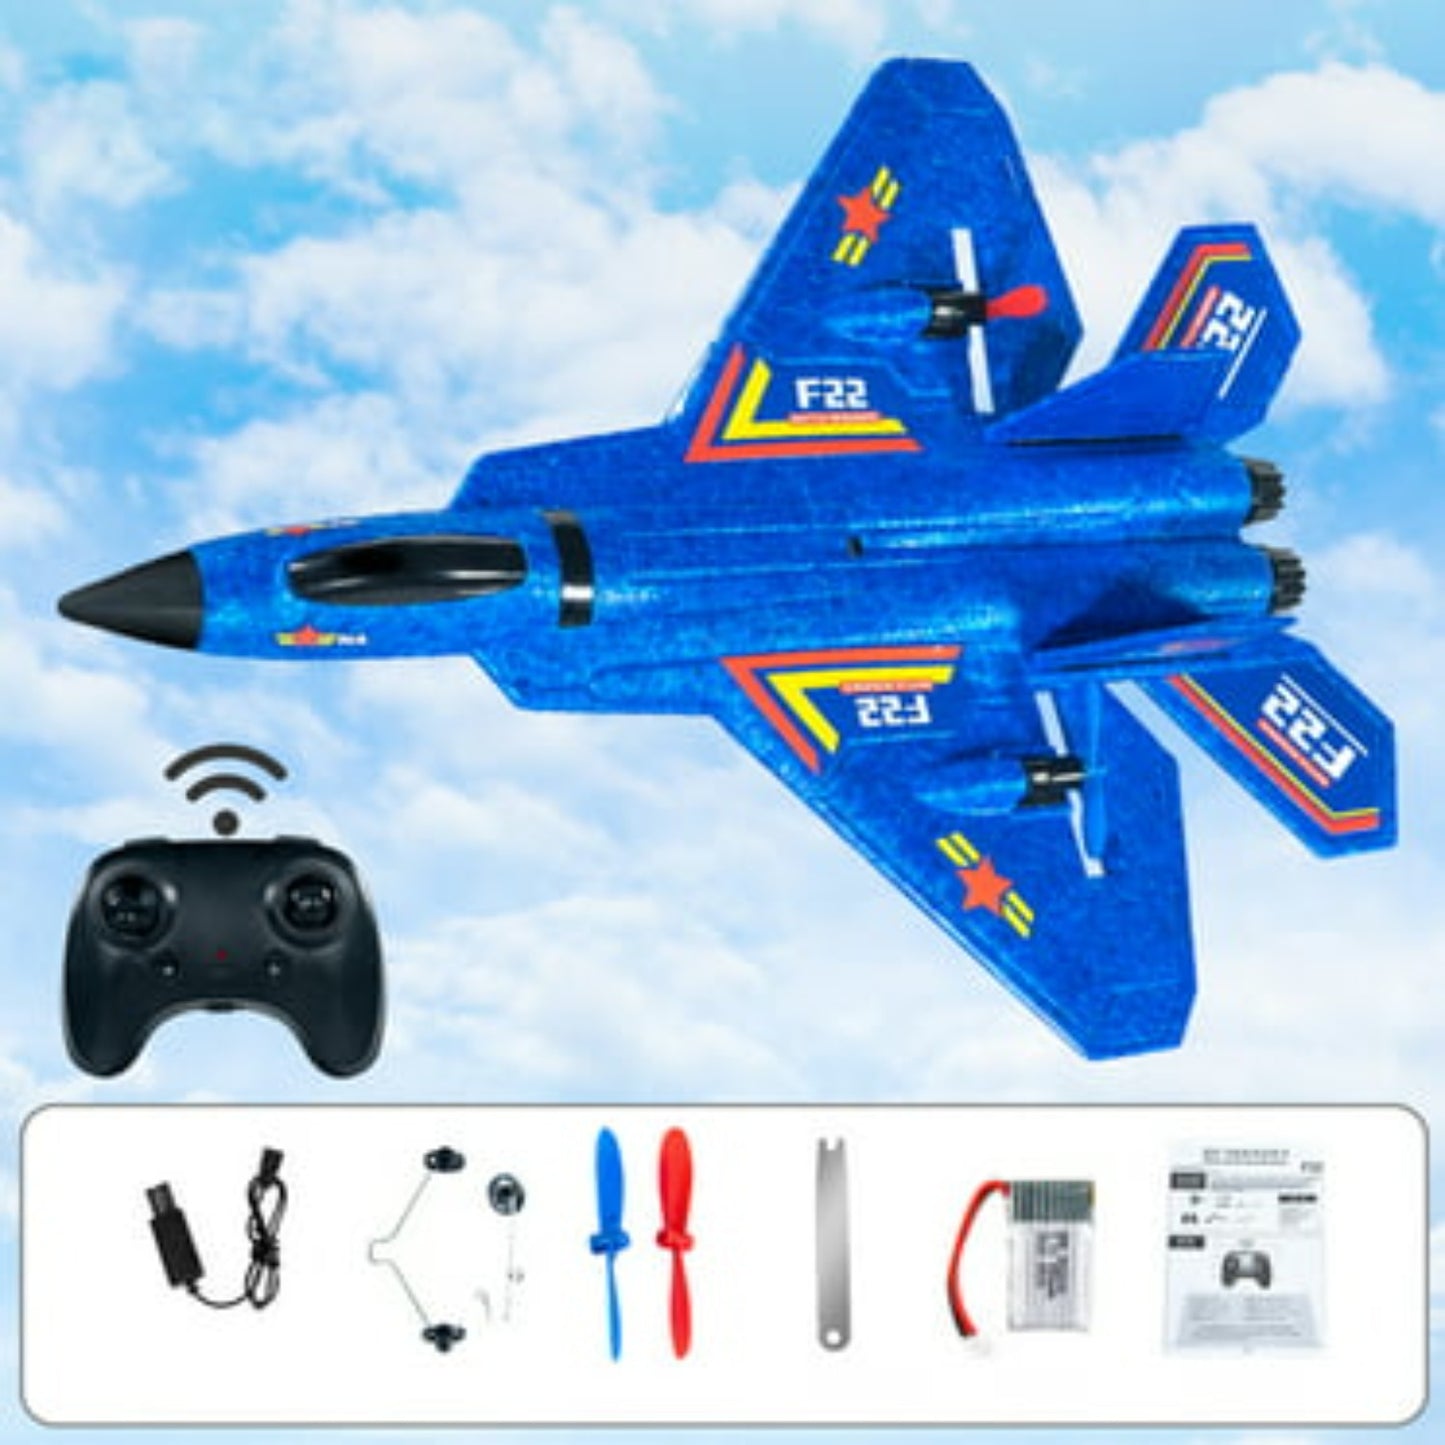 F22 Remote Control Fighter Jet for Kids